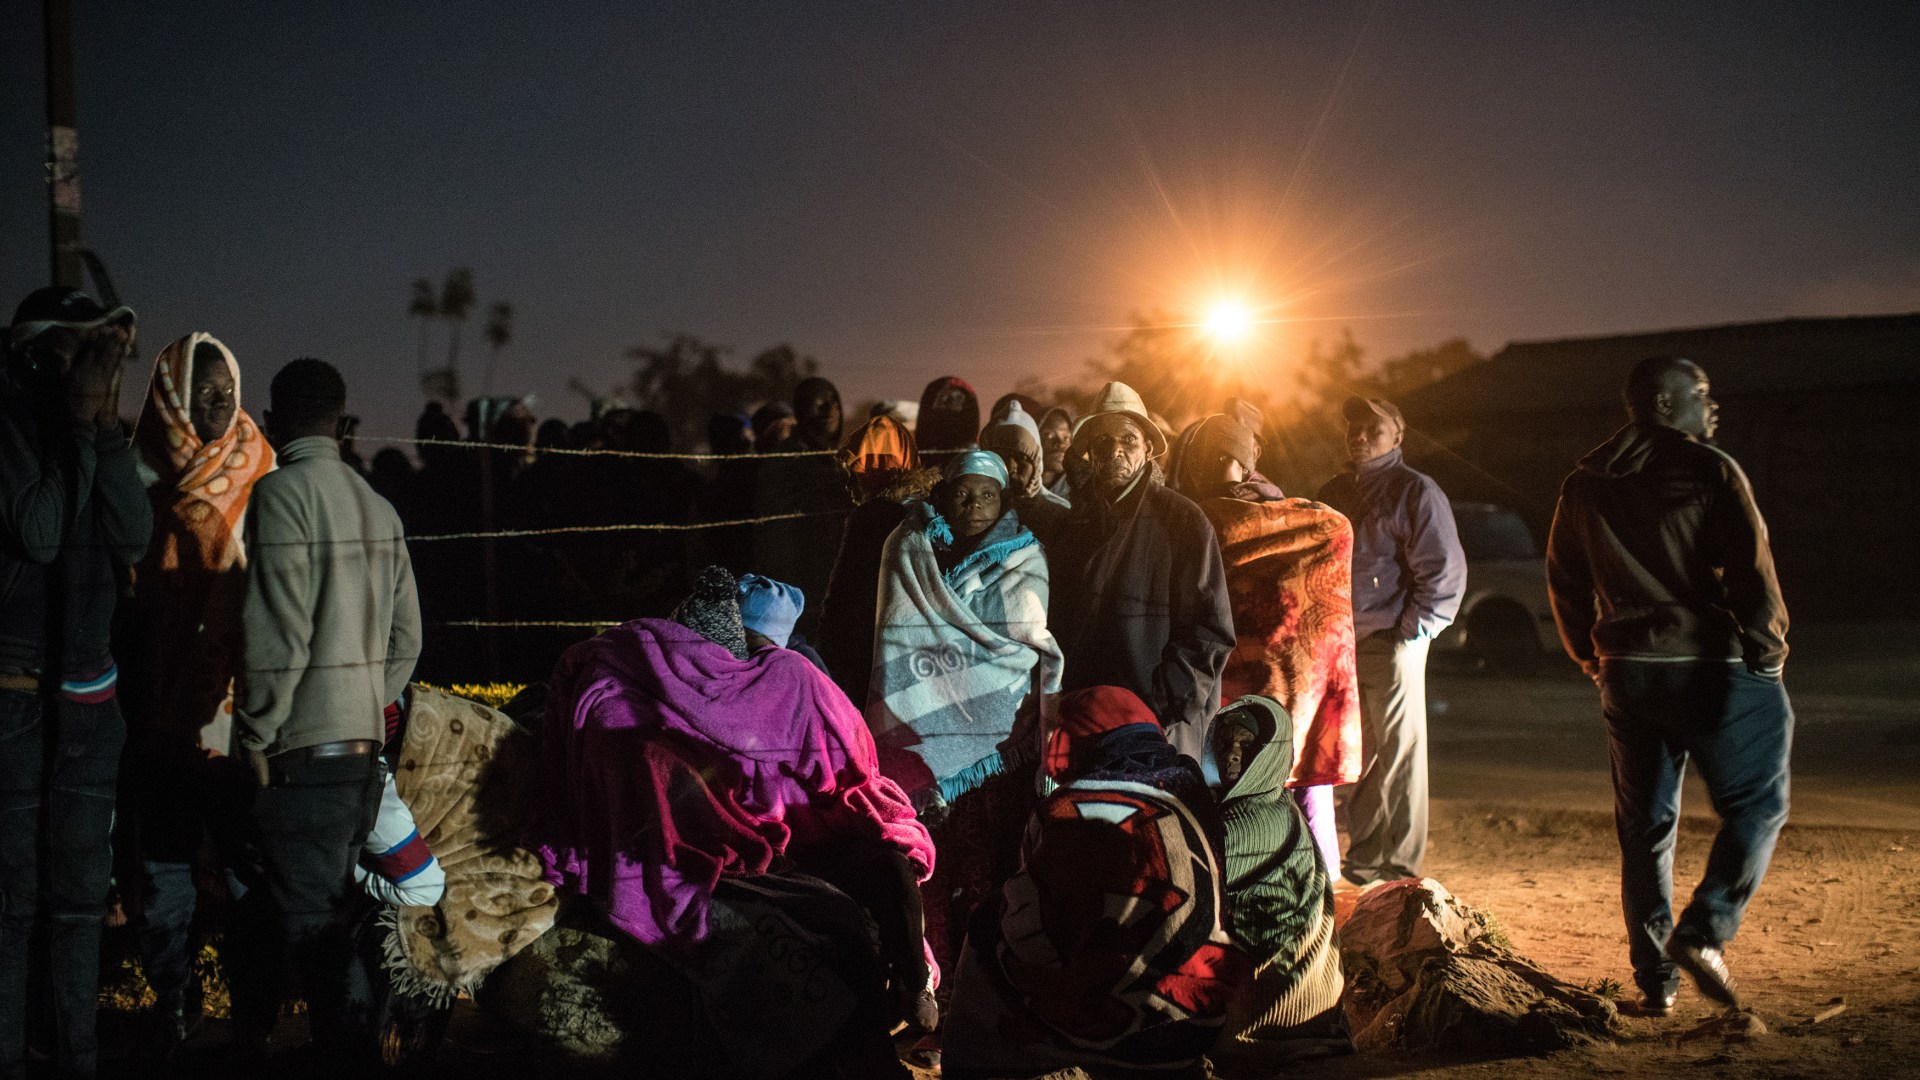 A photo of people queuing in the dark with the sun rising.